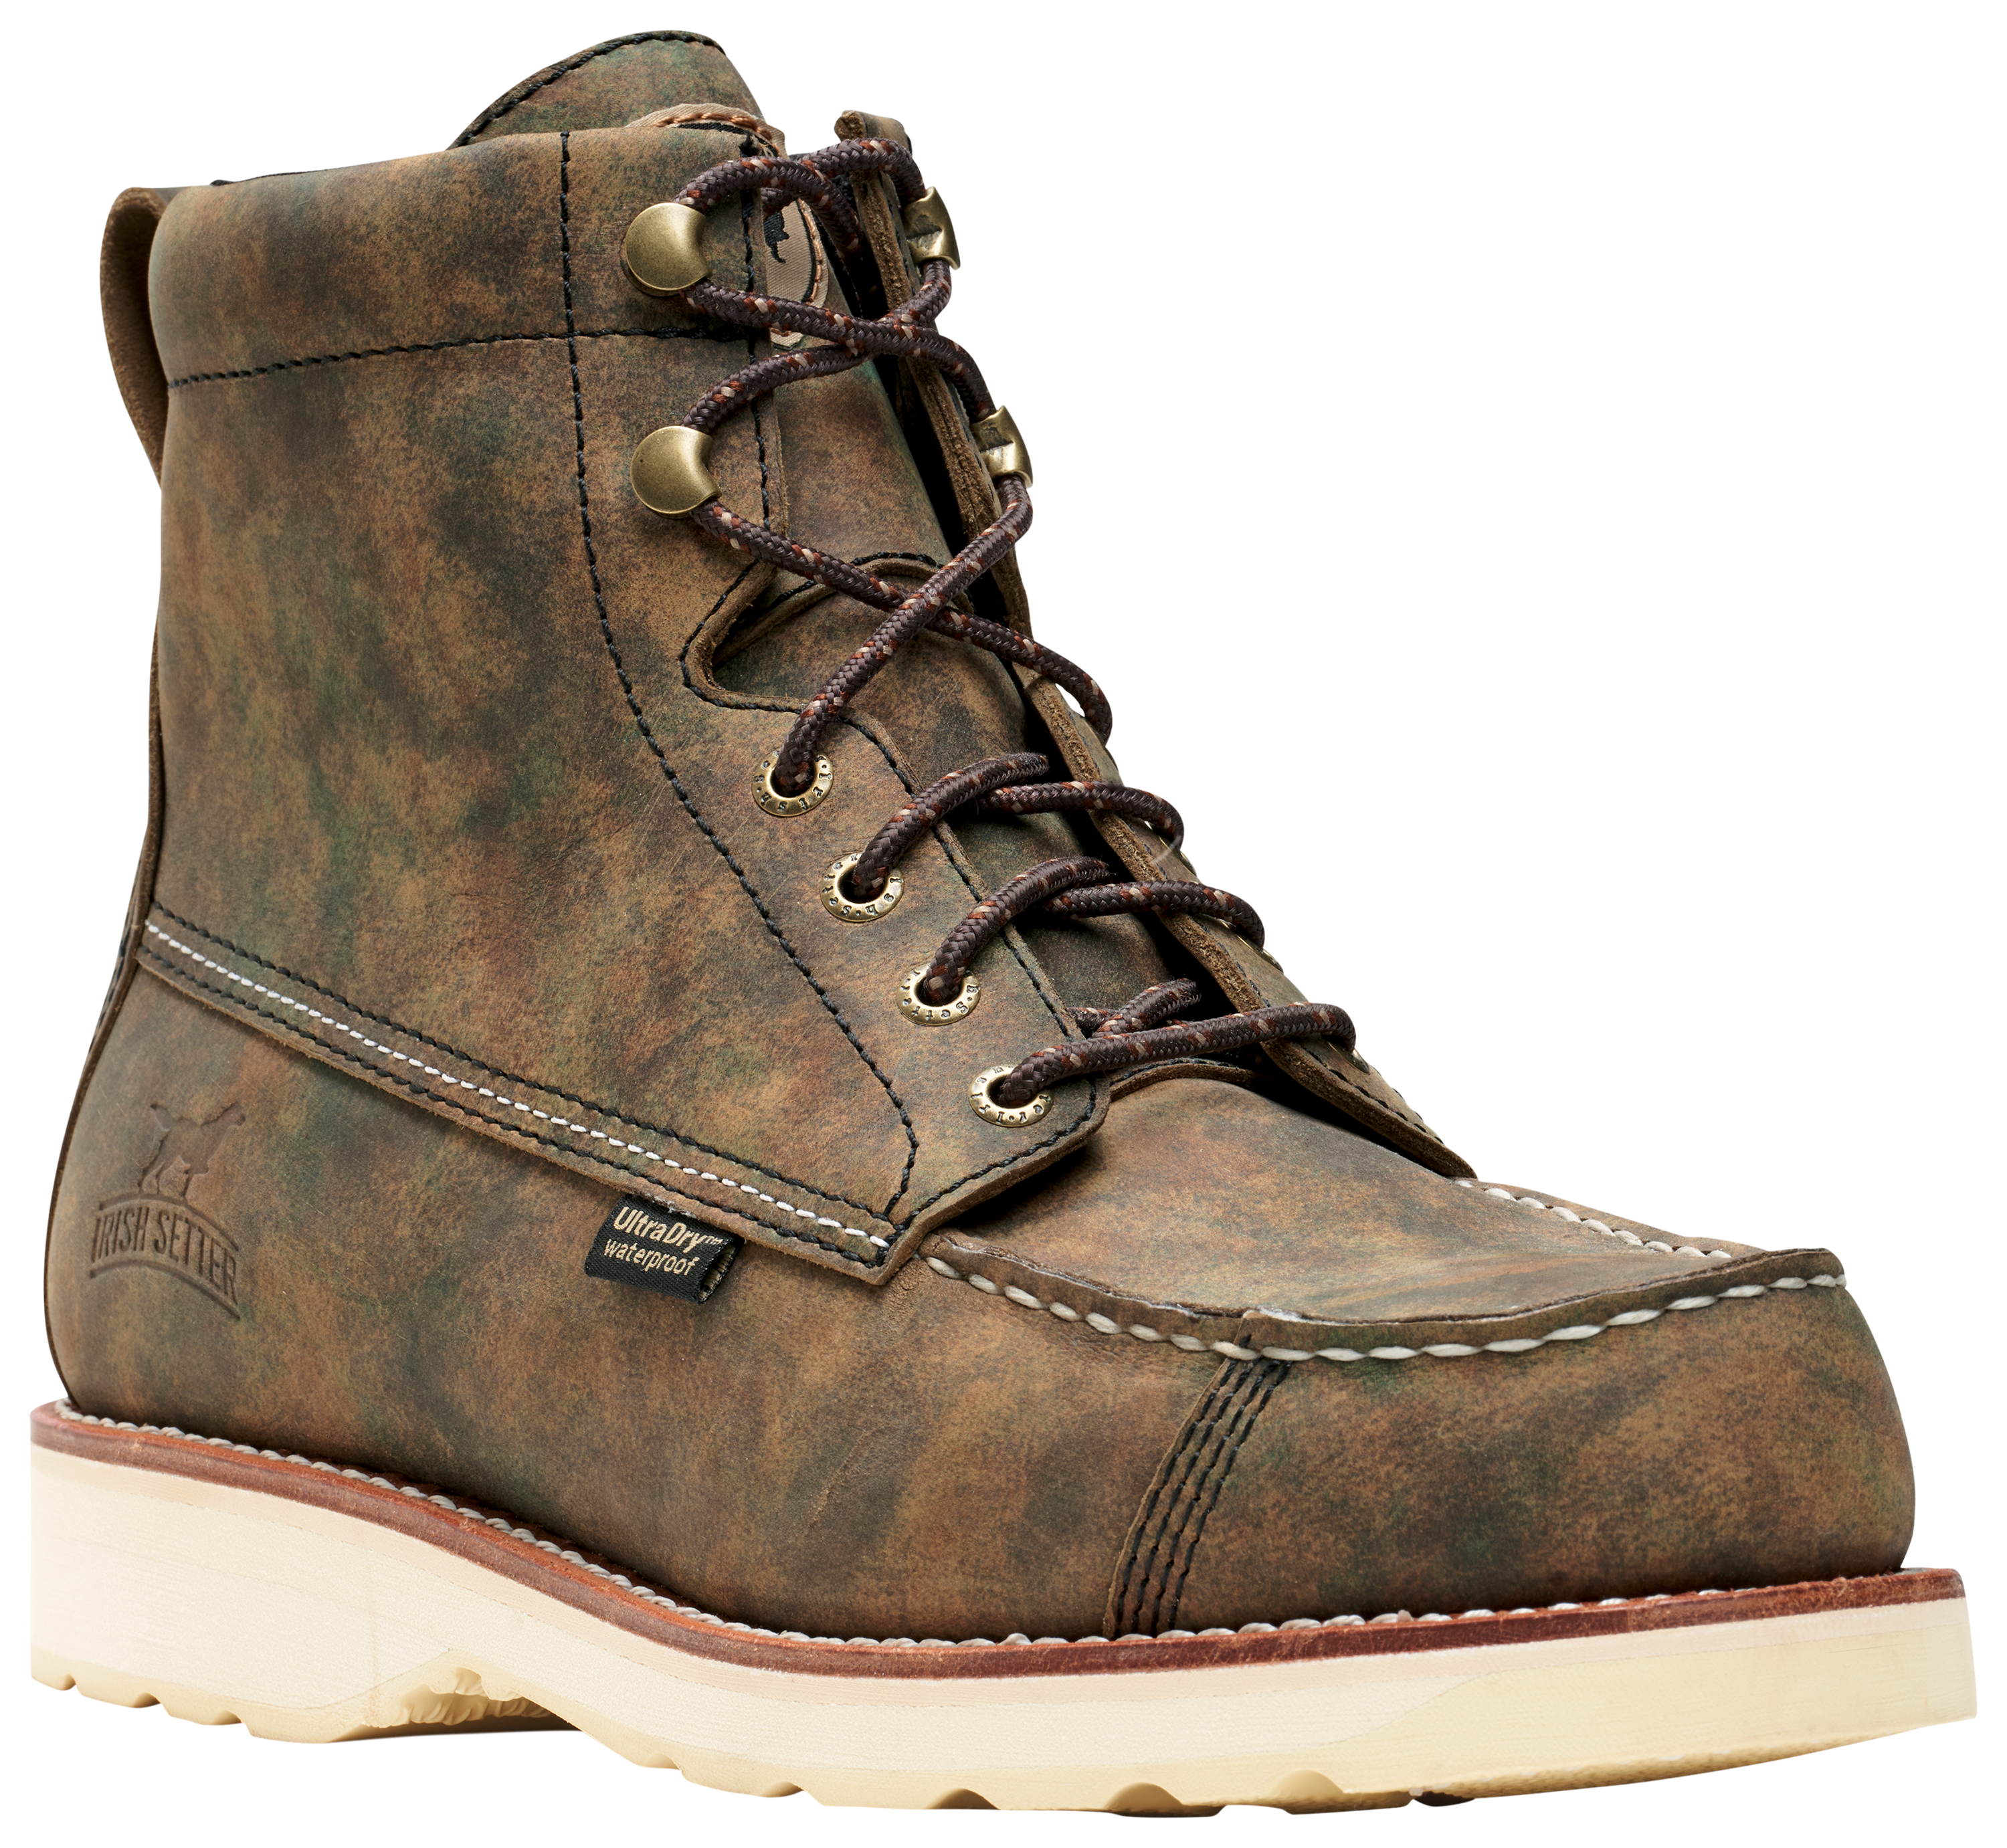 Irish Setter Wingshooter 7 Waterproof Hunting Boots for Men - Earth Camo - 11M